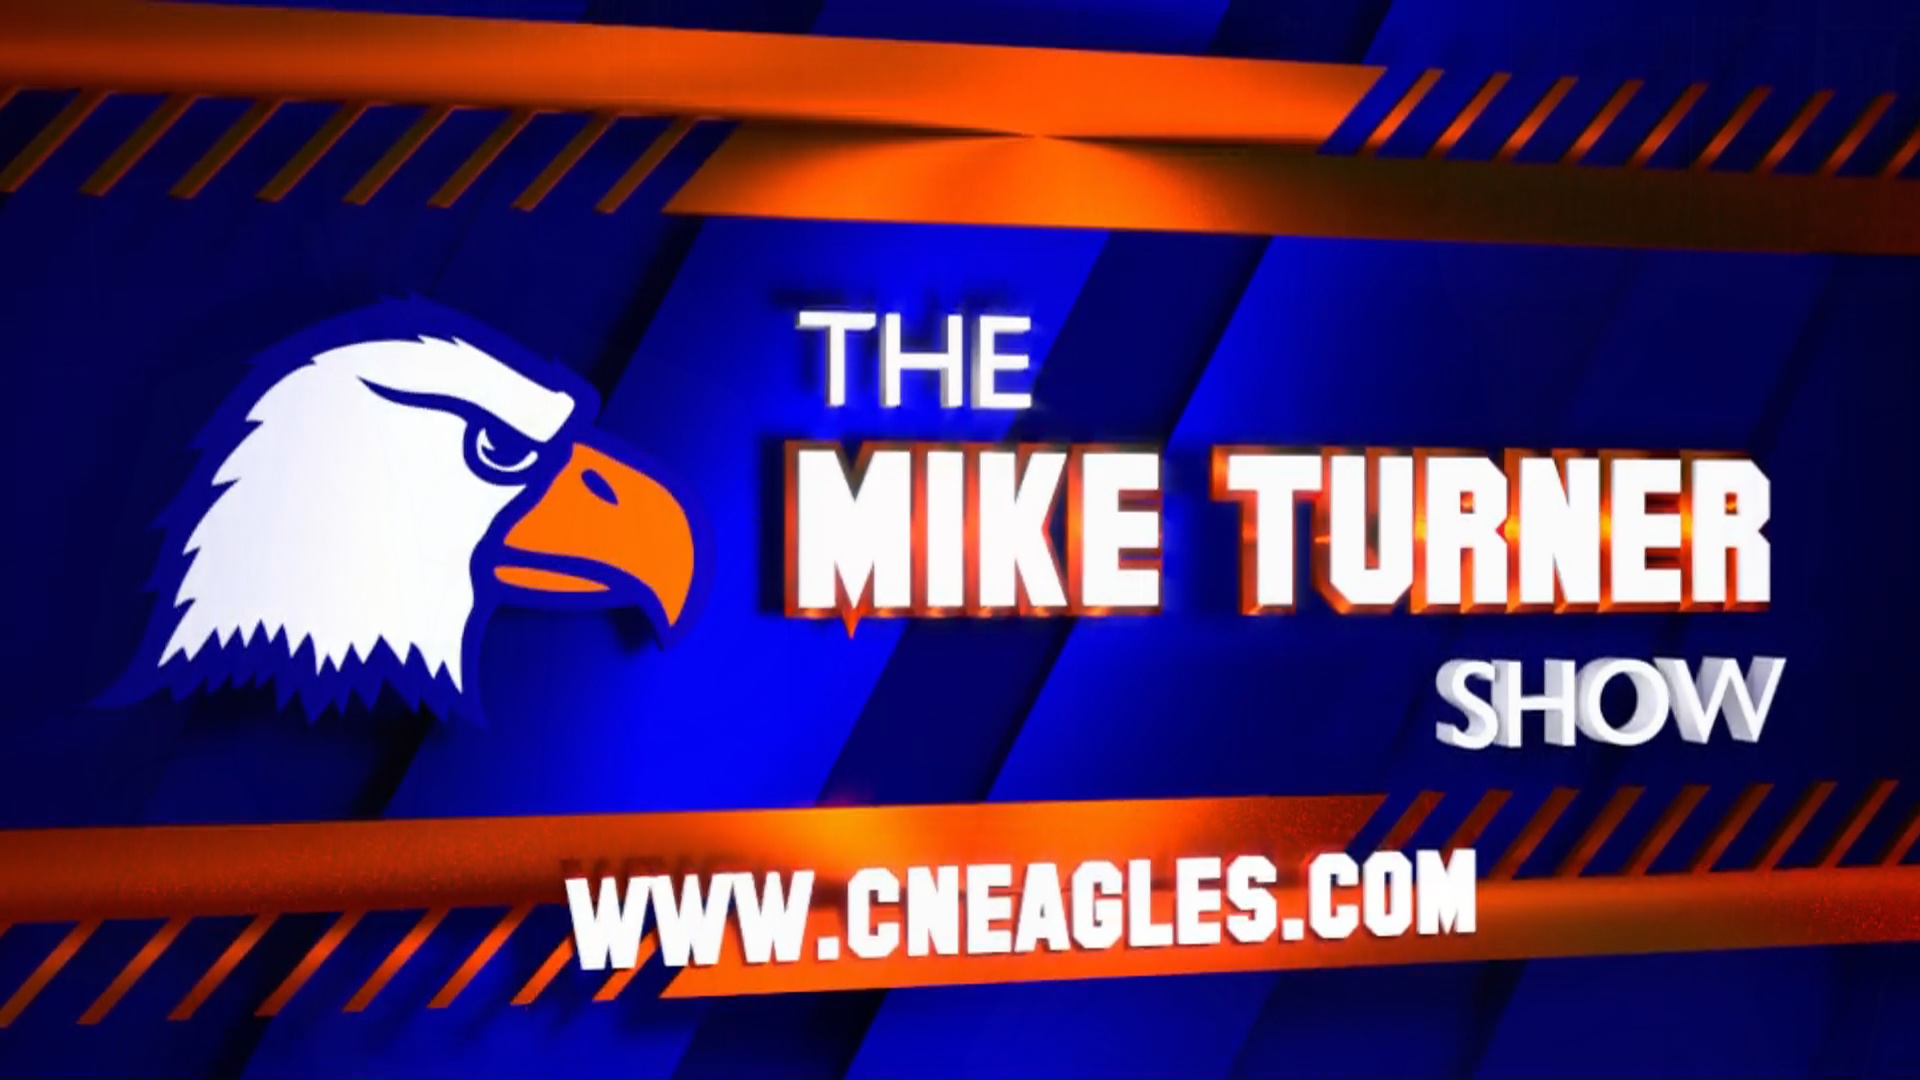 Week three of The Mike Turner Show available online